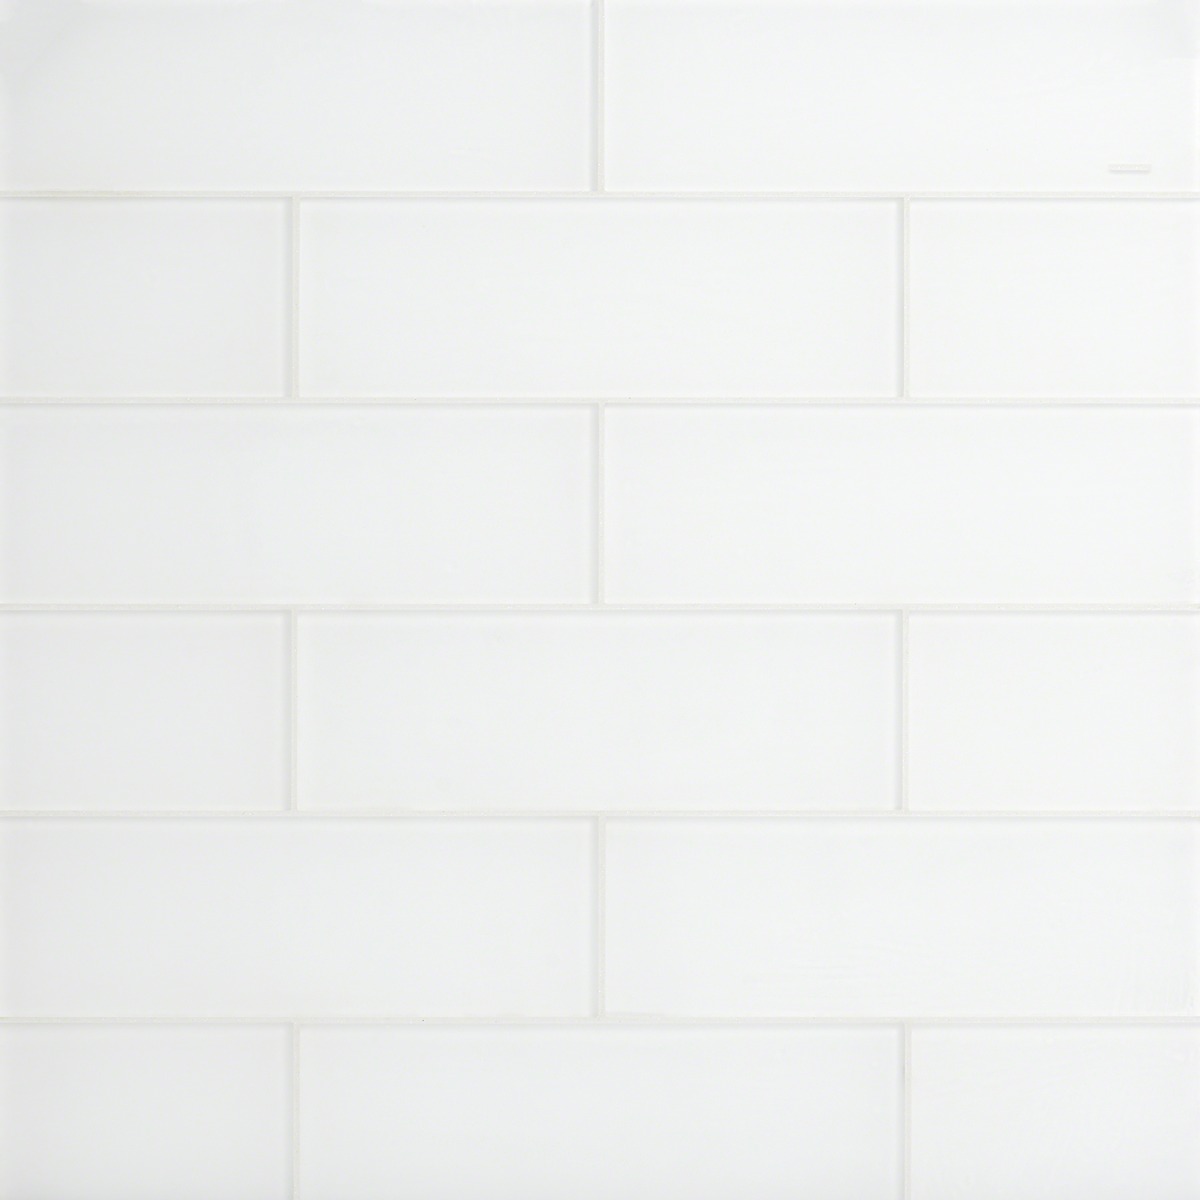 Loft Super White 4x12 Frosted Glass Subway Wall Tile